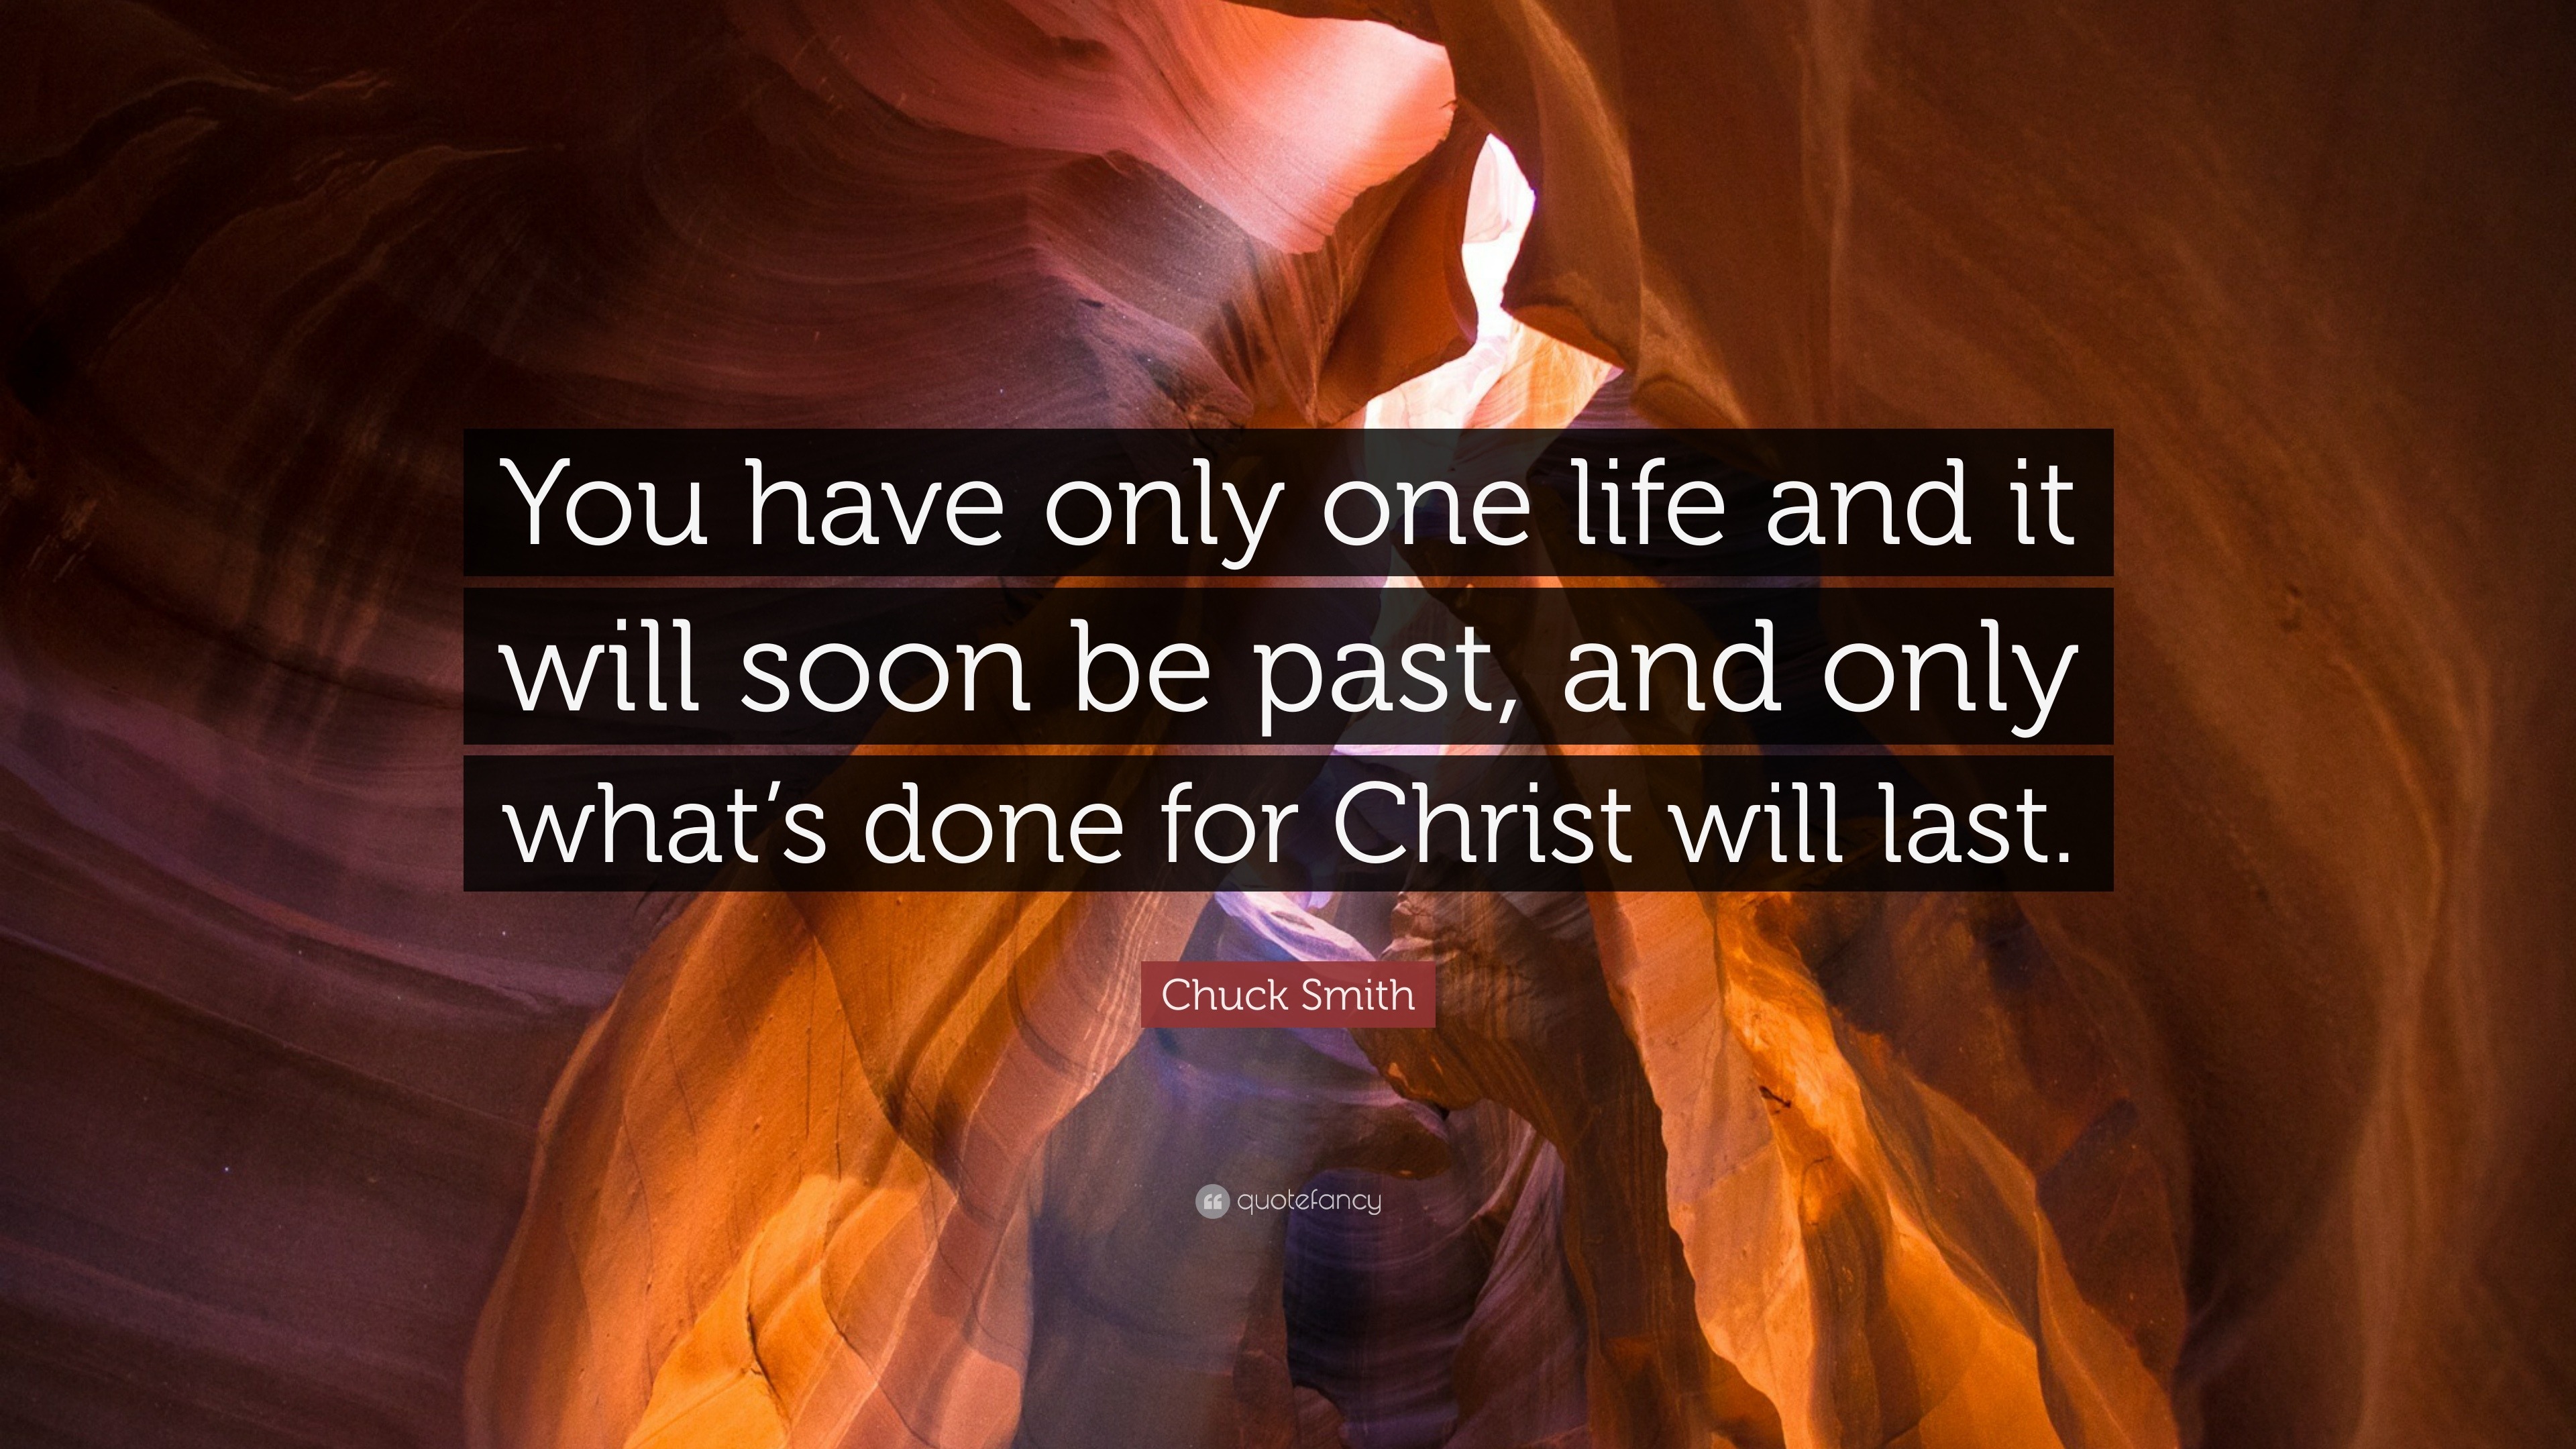 Chuck Smith Quote: "You have only one life and it will ...